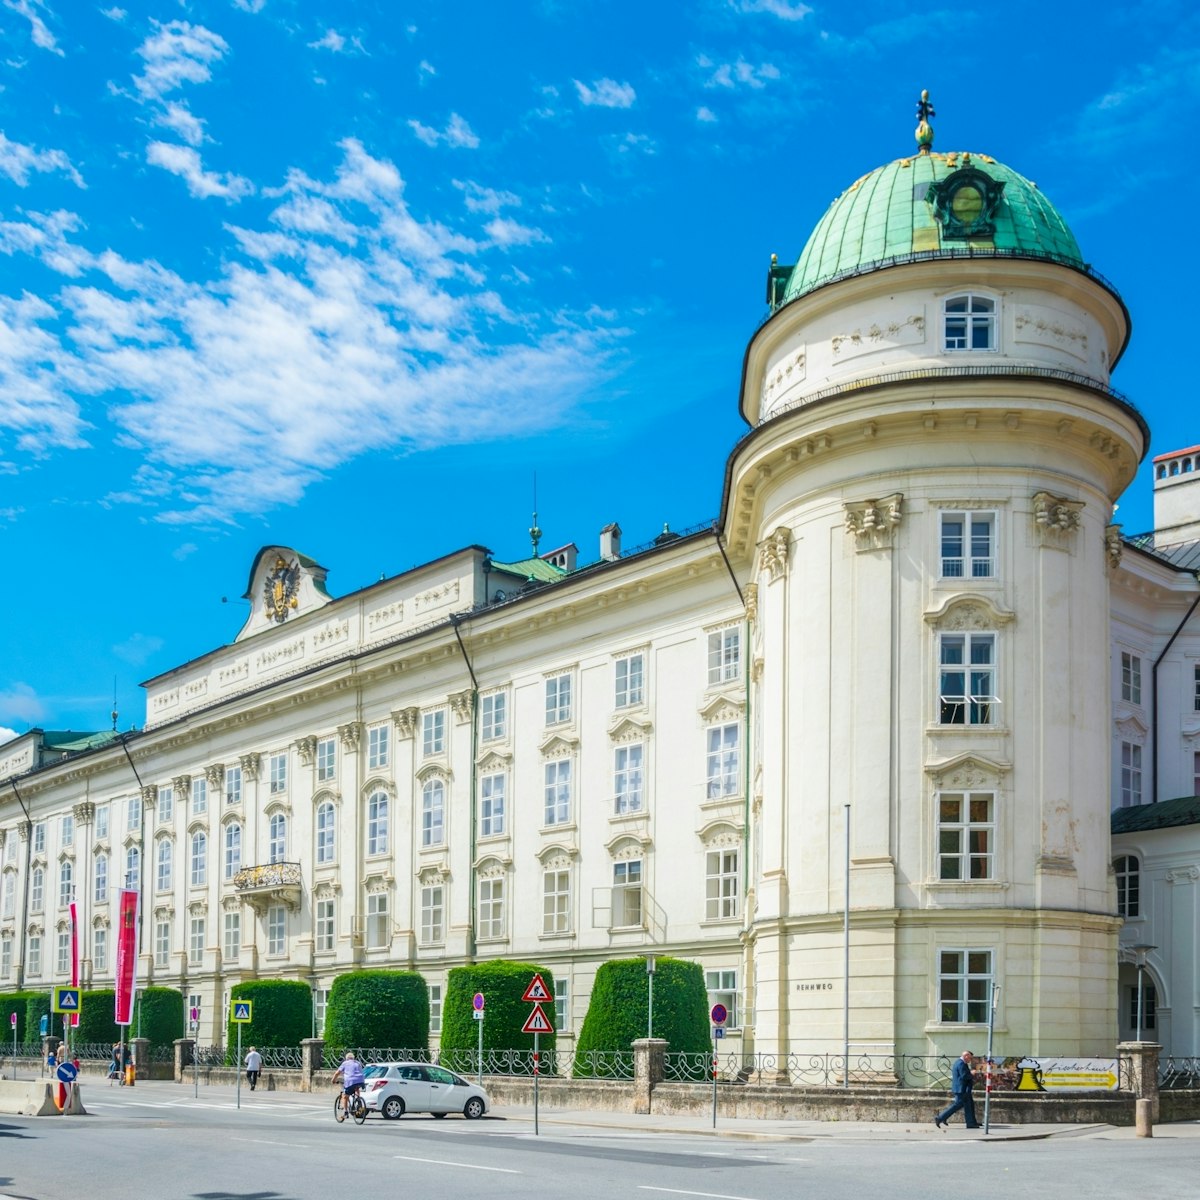 People are passing around the palace Hofburg in Innsbruck, Austria.; Shutterstock ID 550745233; Your name (First / Last): Daniel Fahey; GL account no.: 65050; Netsuite department name: Online Editorial; Full Product or Project name including edition: Hofburg Innsbruck POI